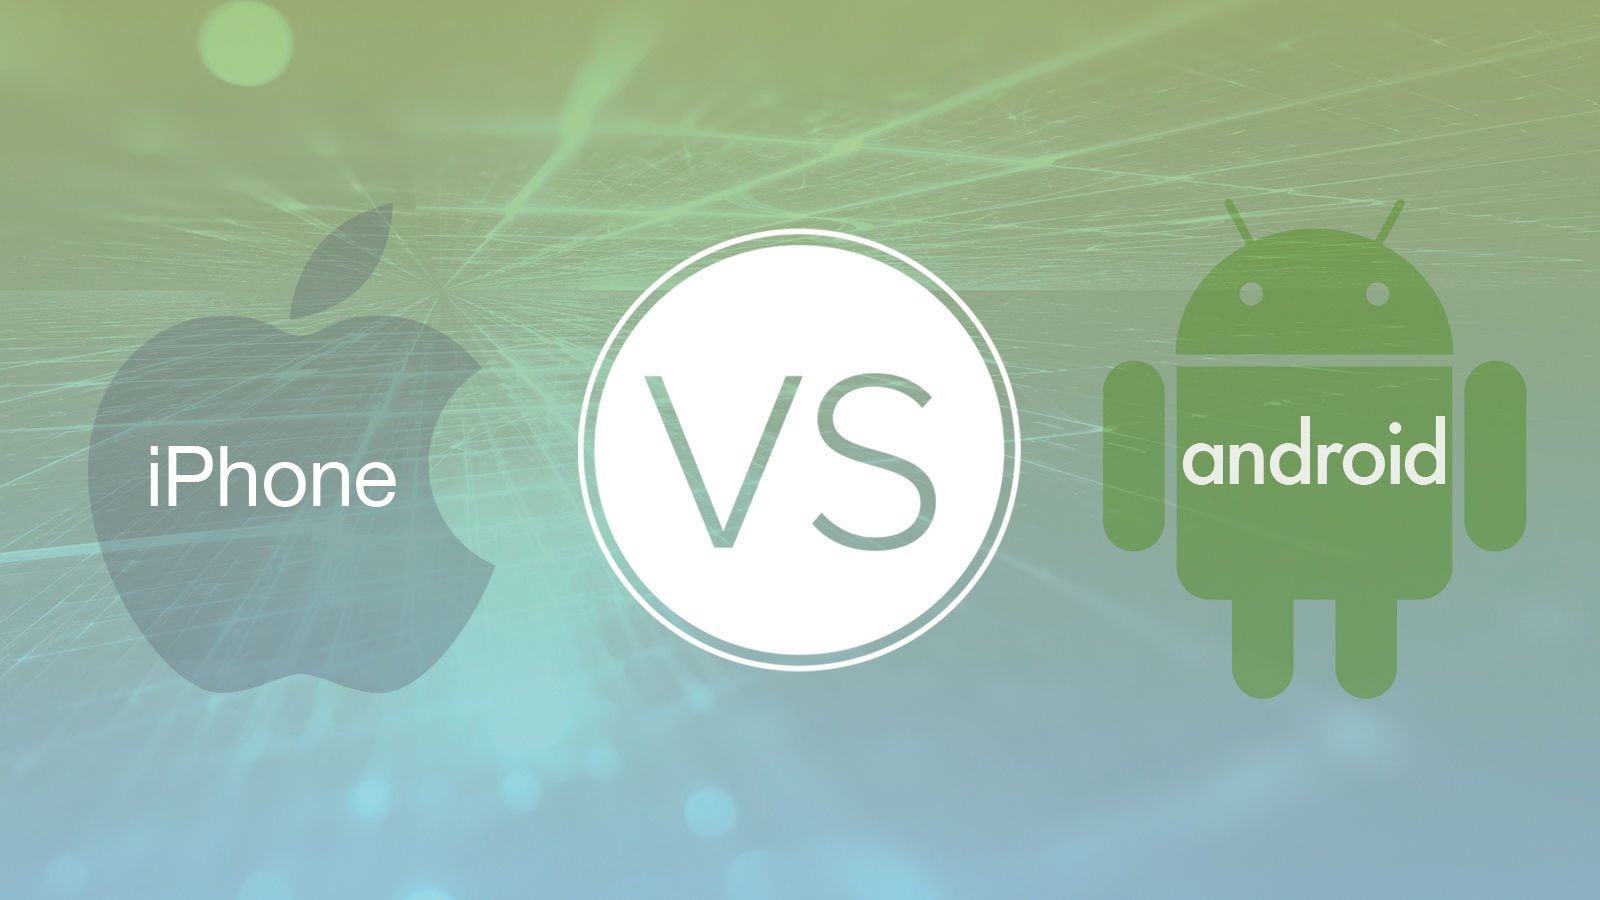 android-smartphones-experience-lower-fai